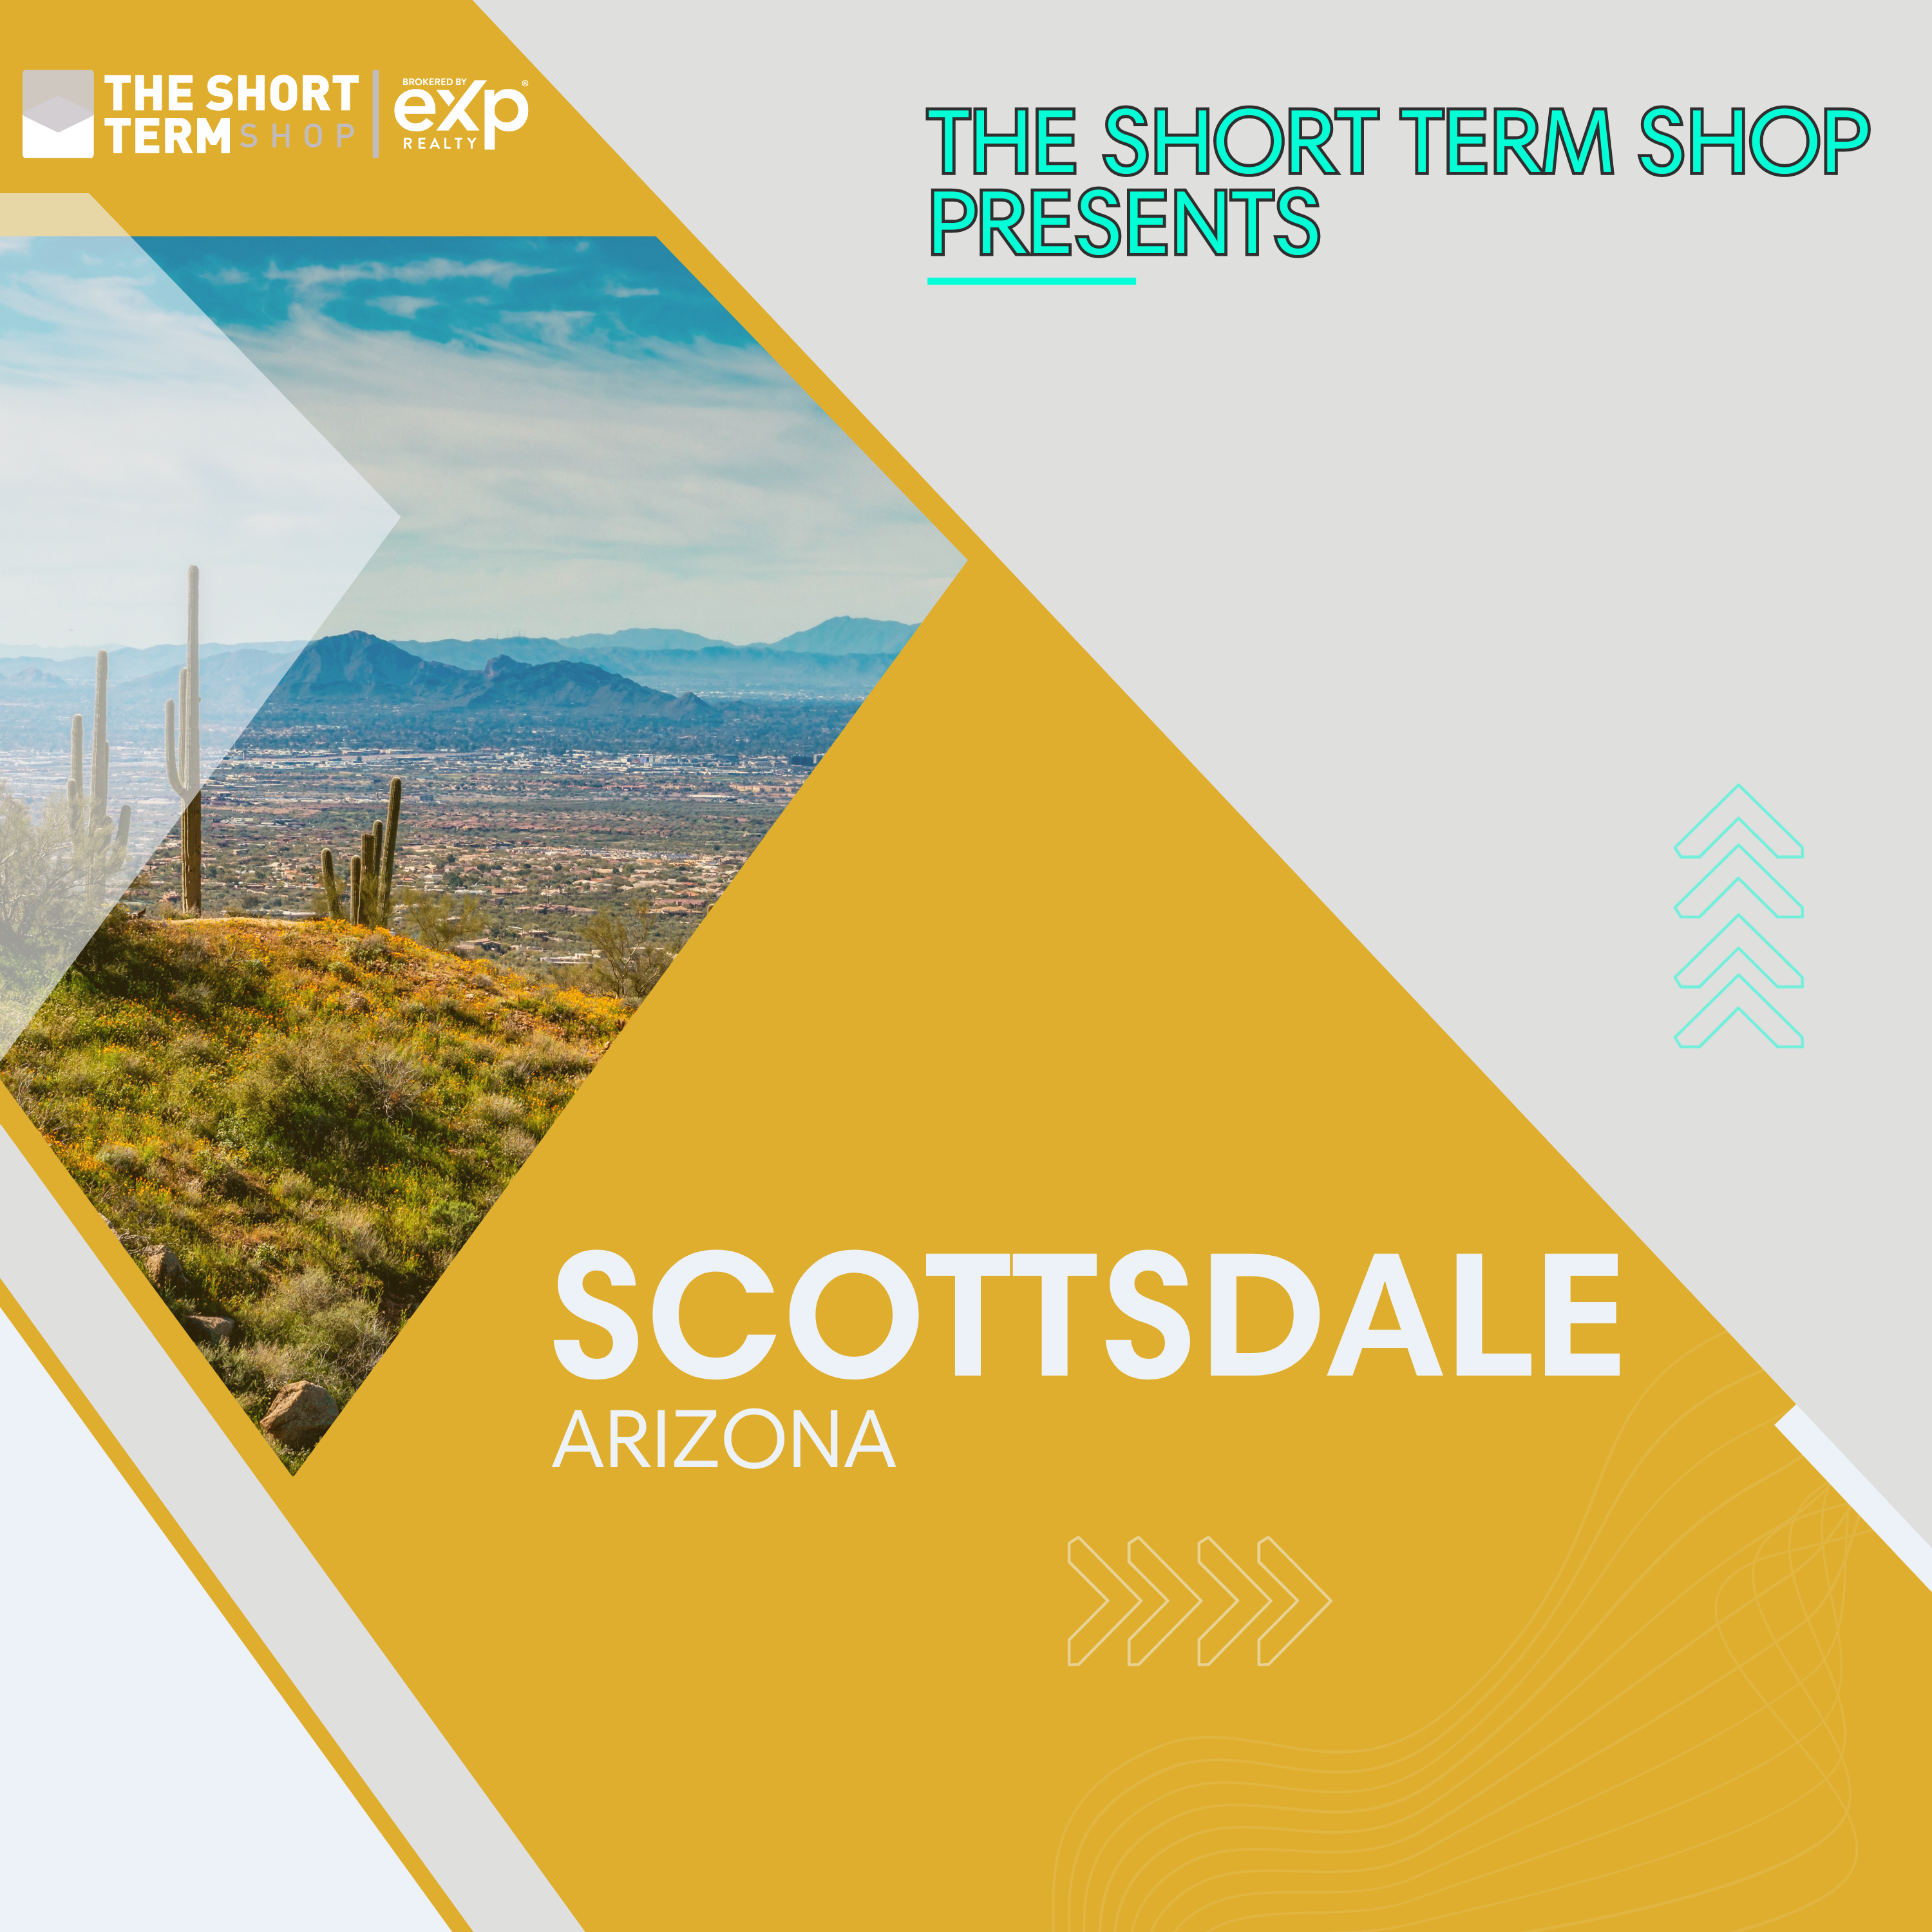 The Real Estate Contract Process When Investing In Short Term Rentals In Scottsdale, AZ